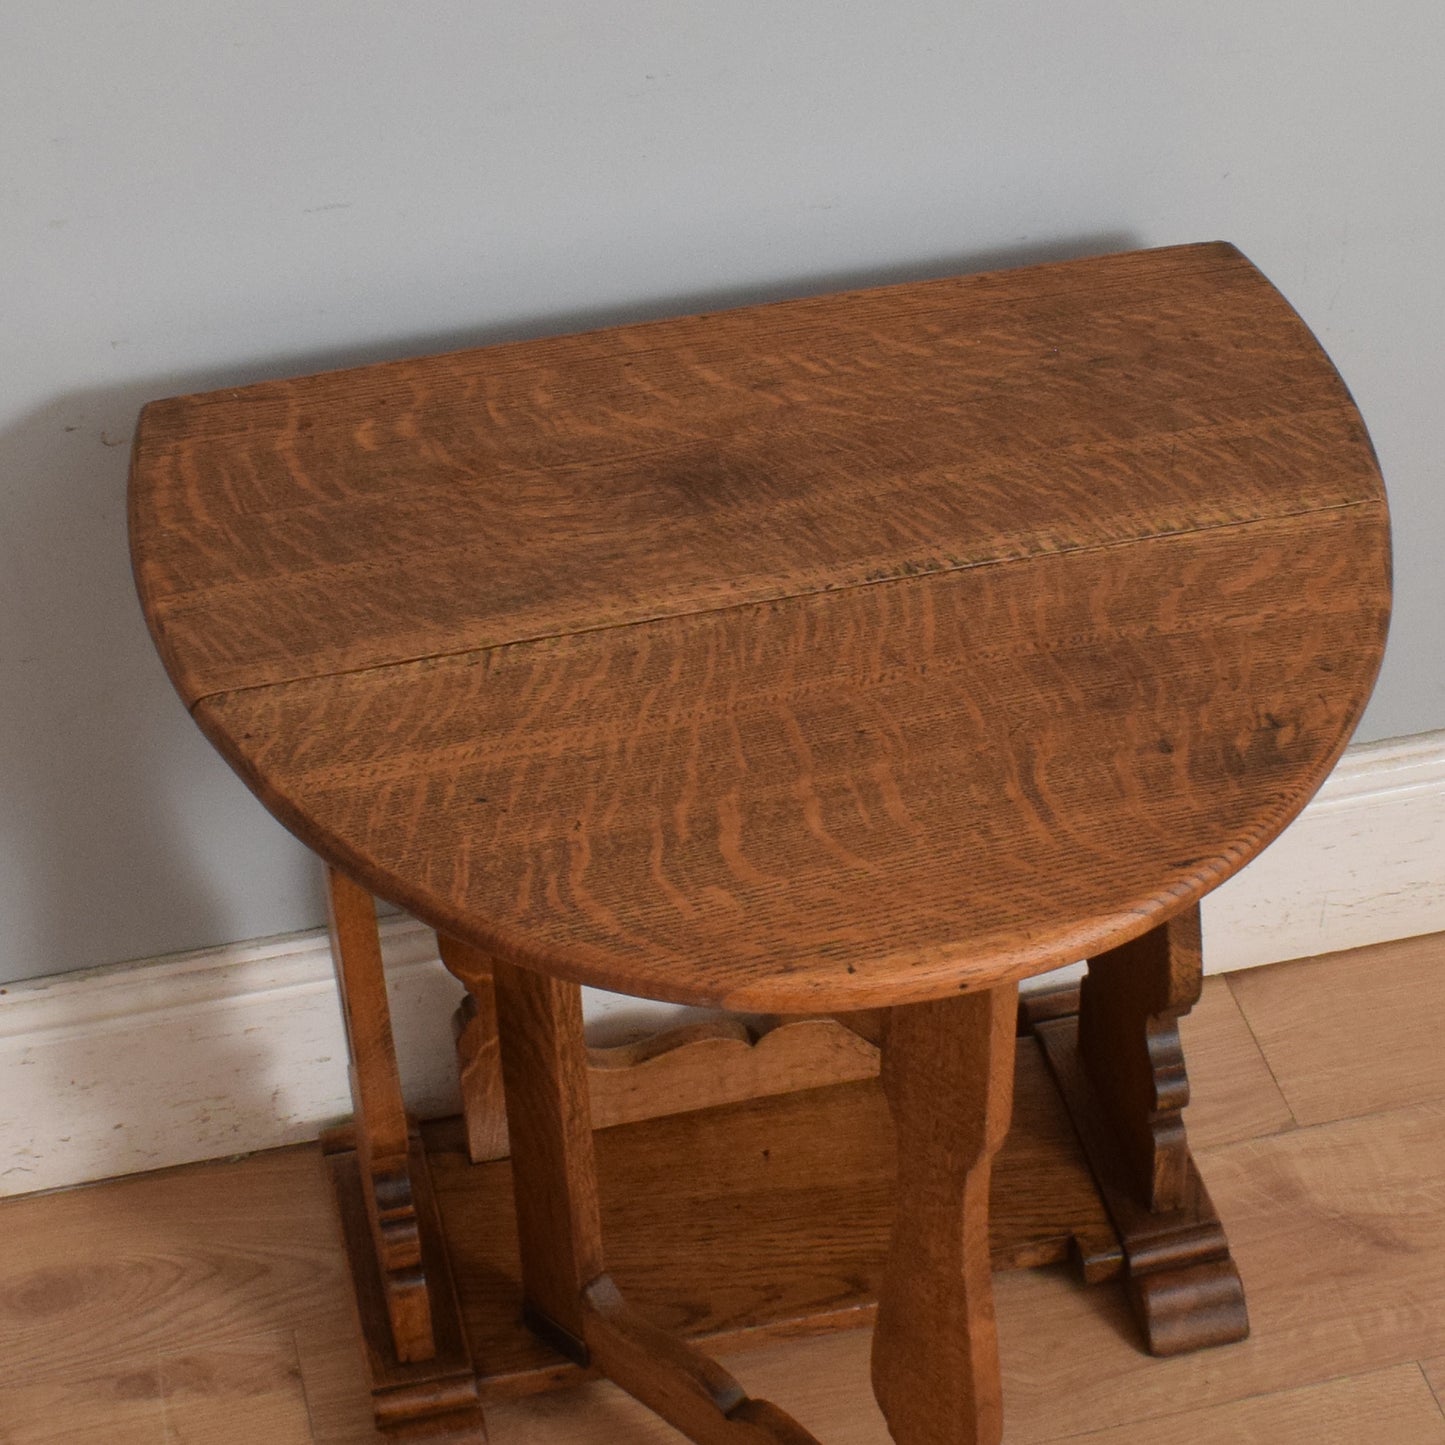 Occasional Drop-Leaf Table